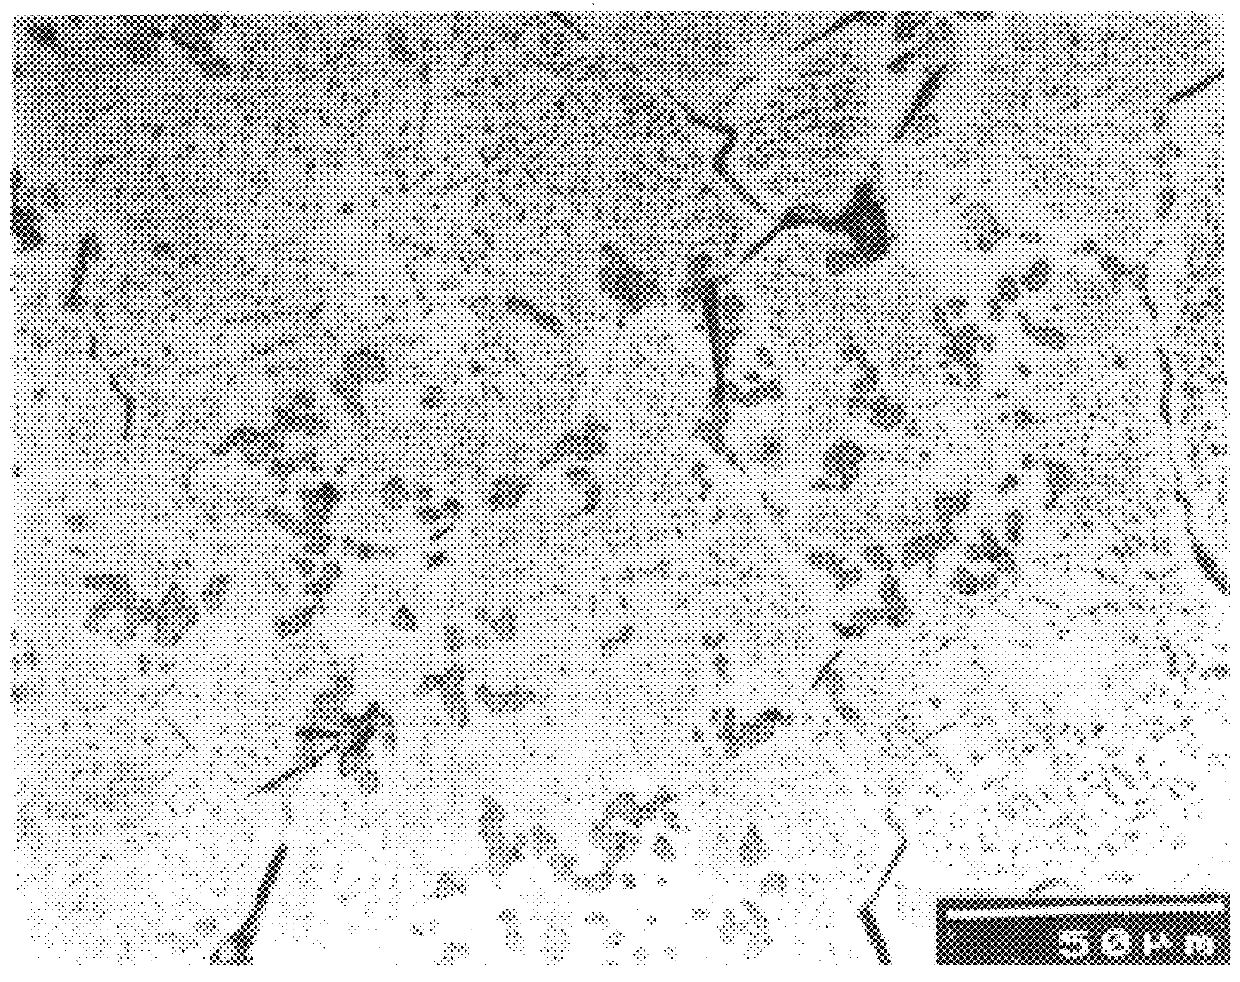 Liquid-state-in-situ-formed ceramic particles in metals and alloys